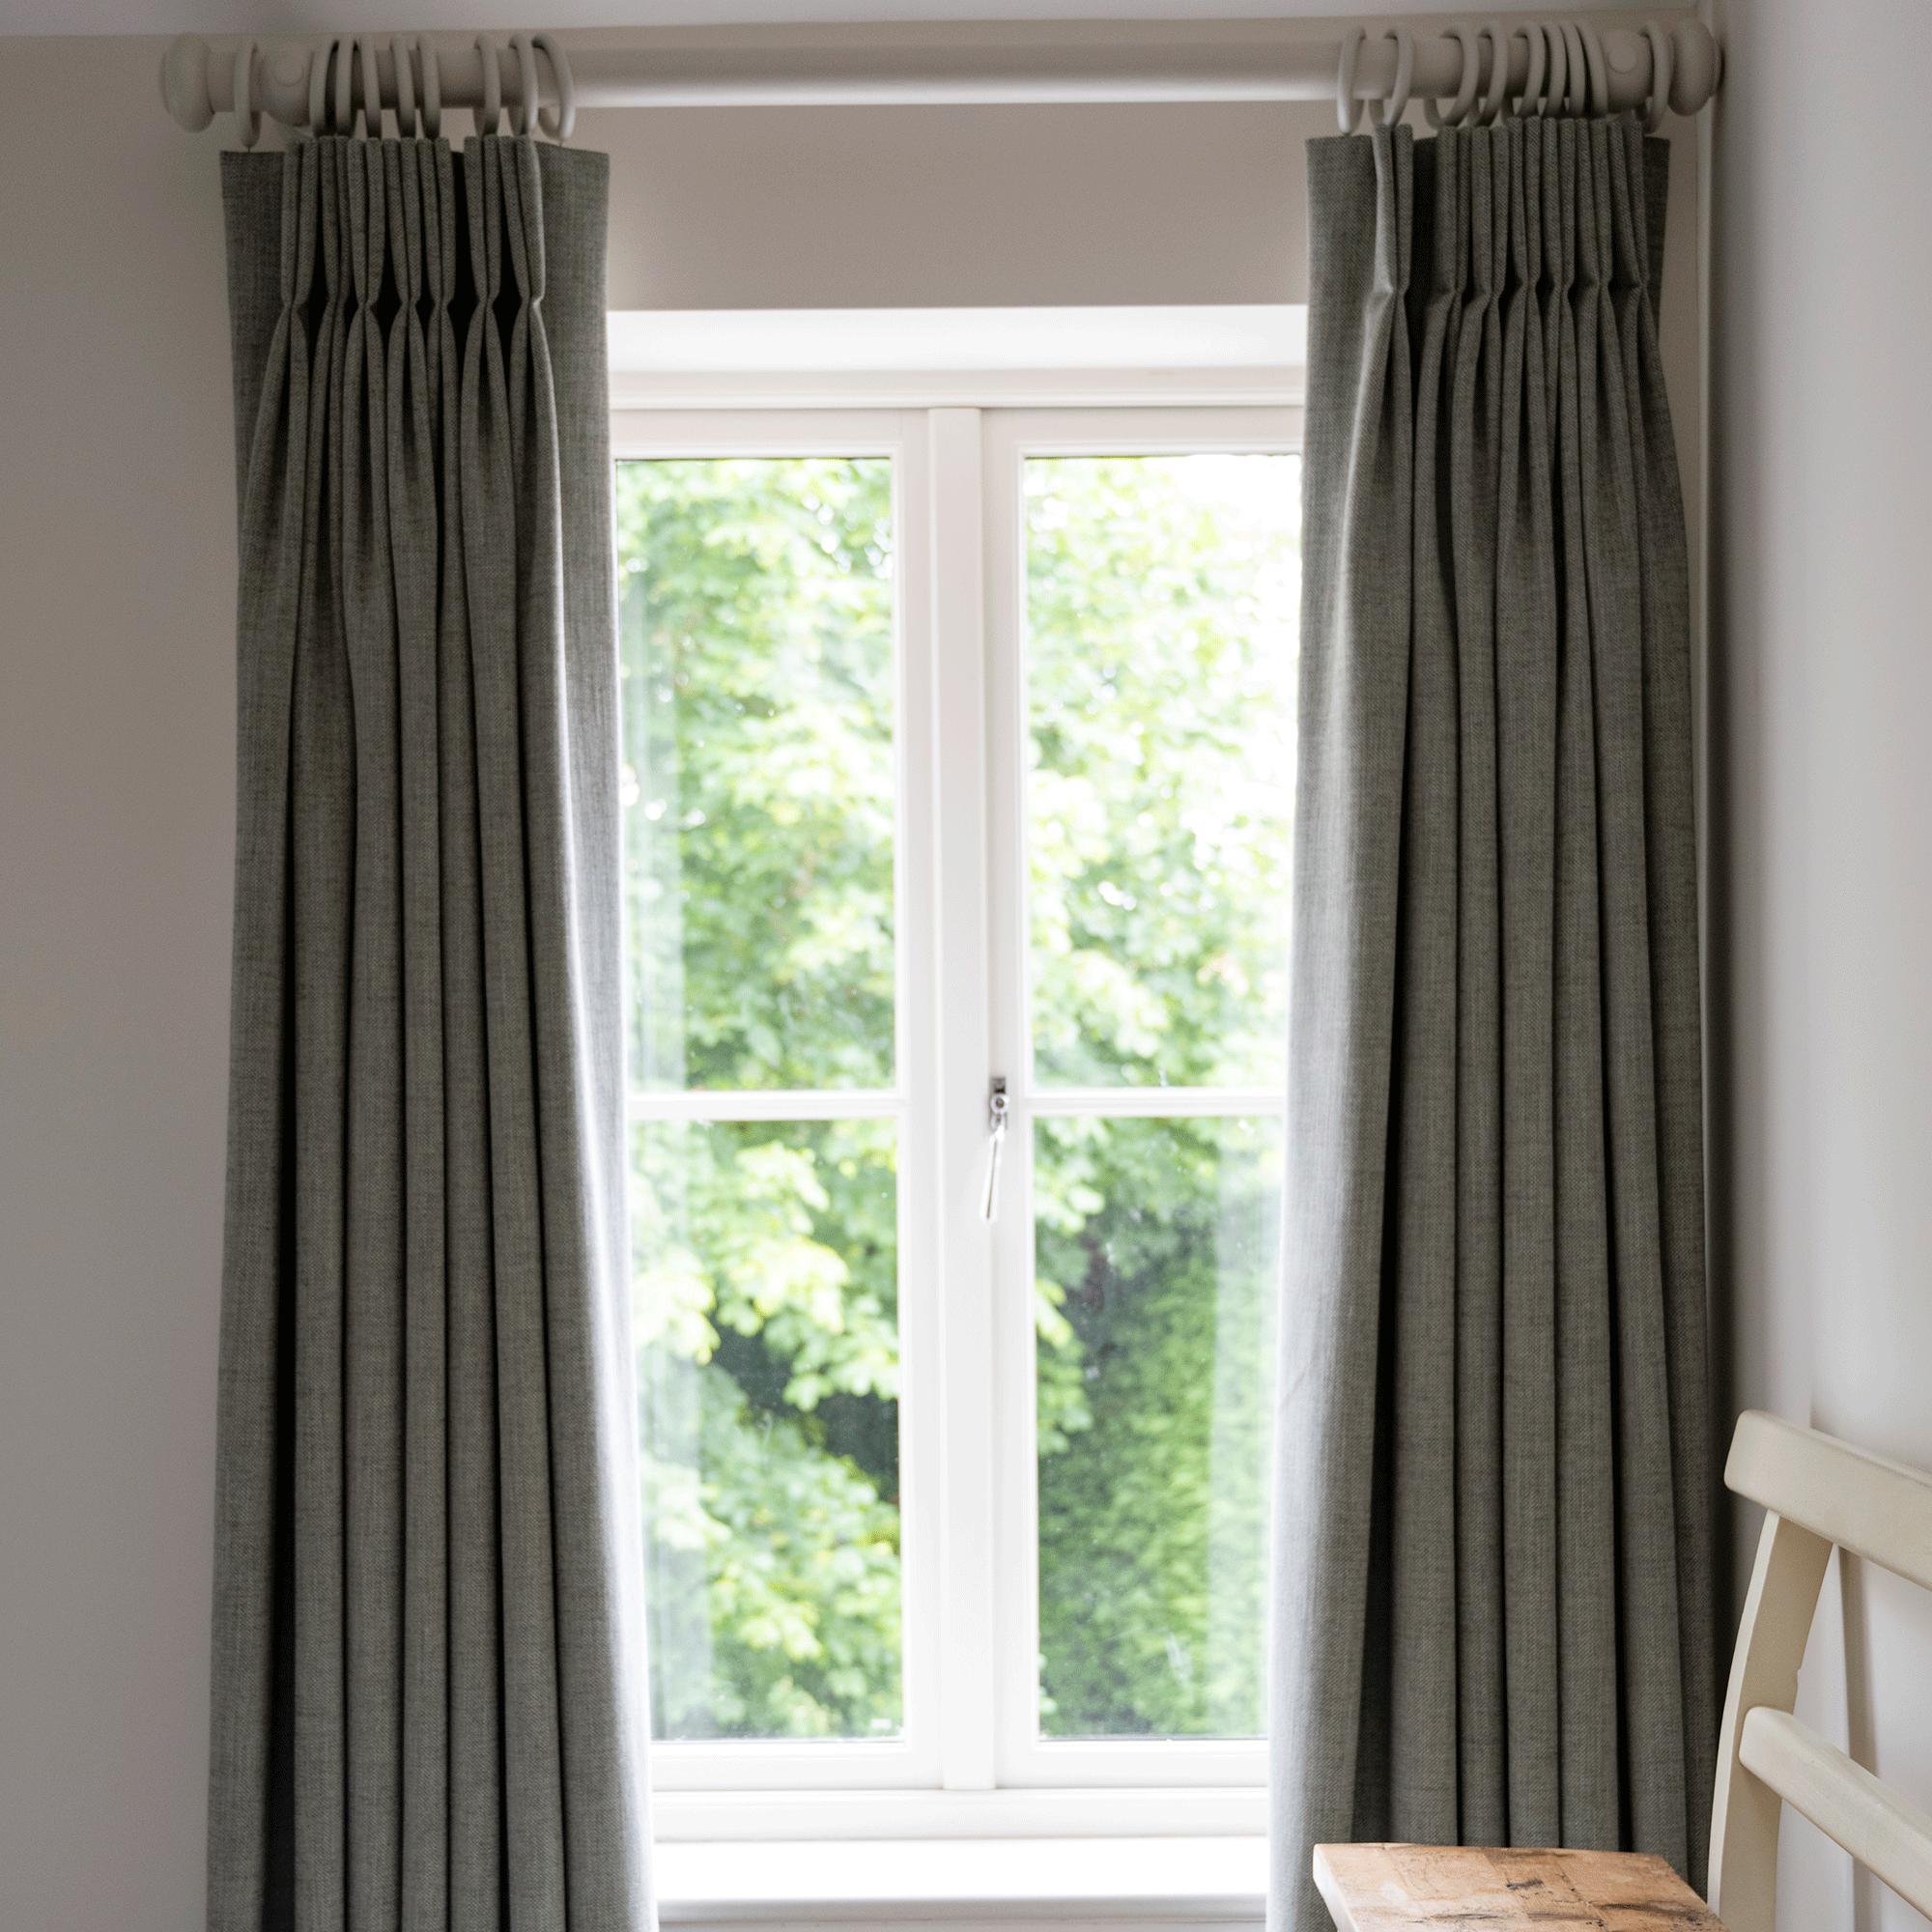 Grey curtains in front of a window